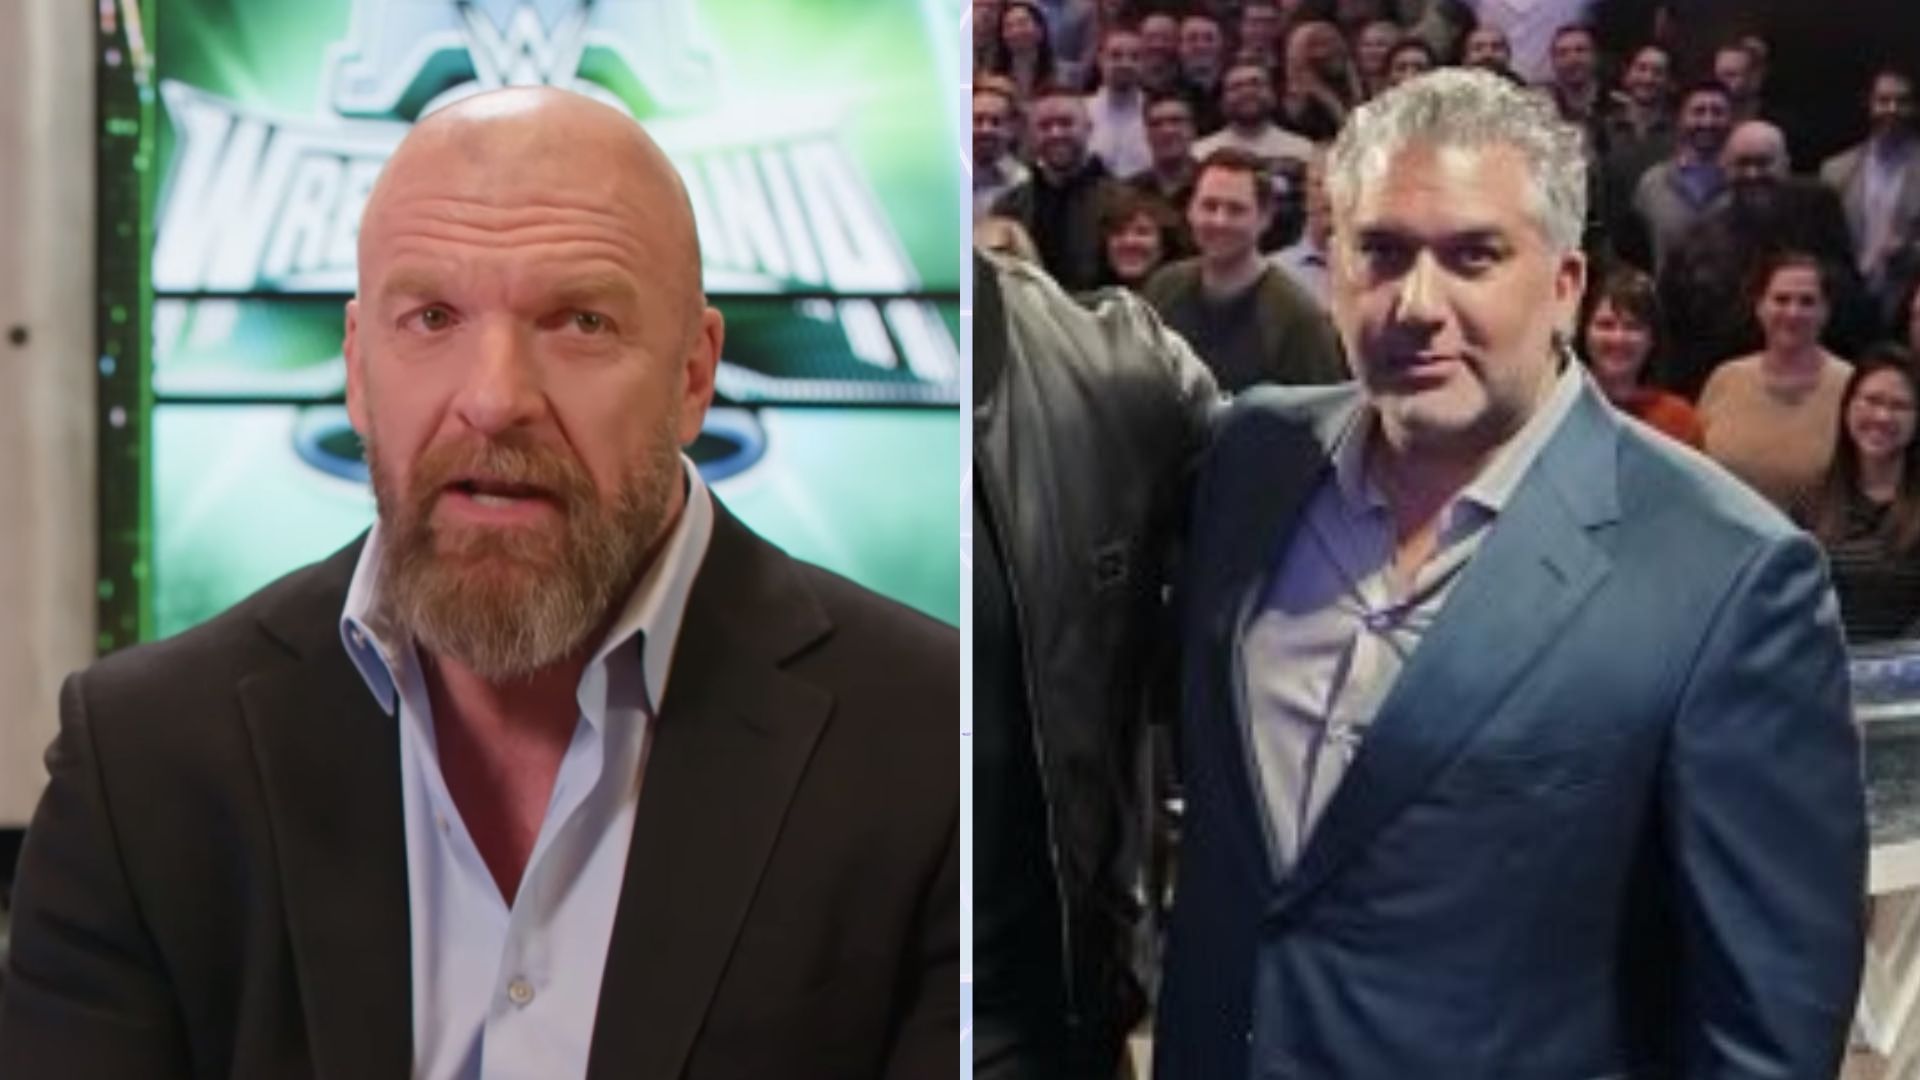 Triple H on the left and Nick Khan on the right [Image credits: WWE